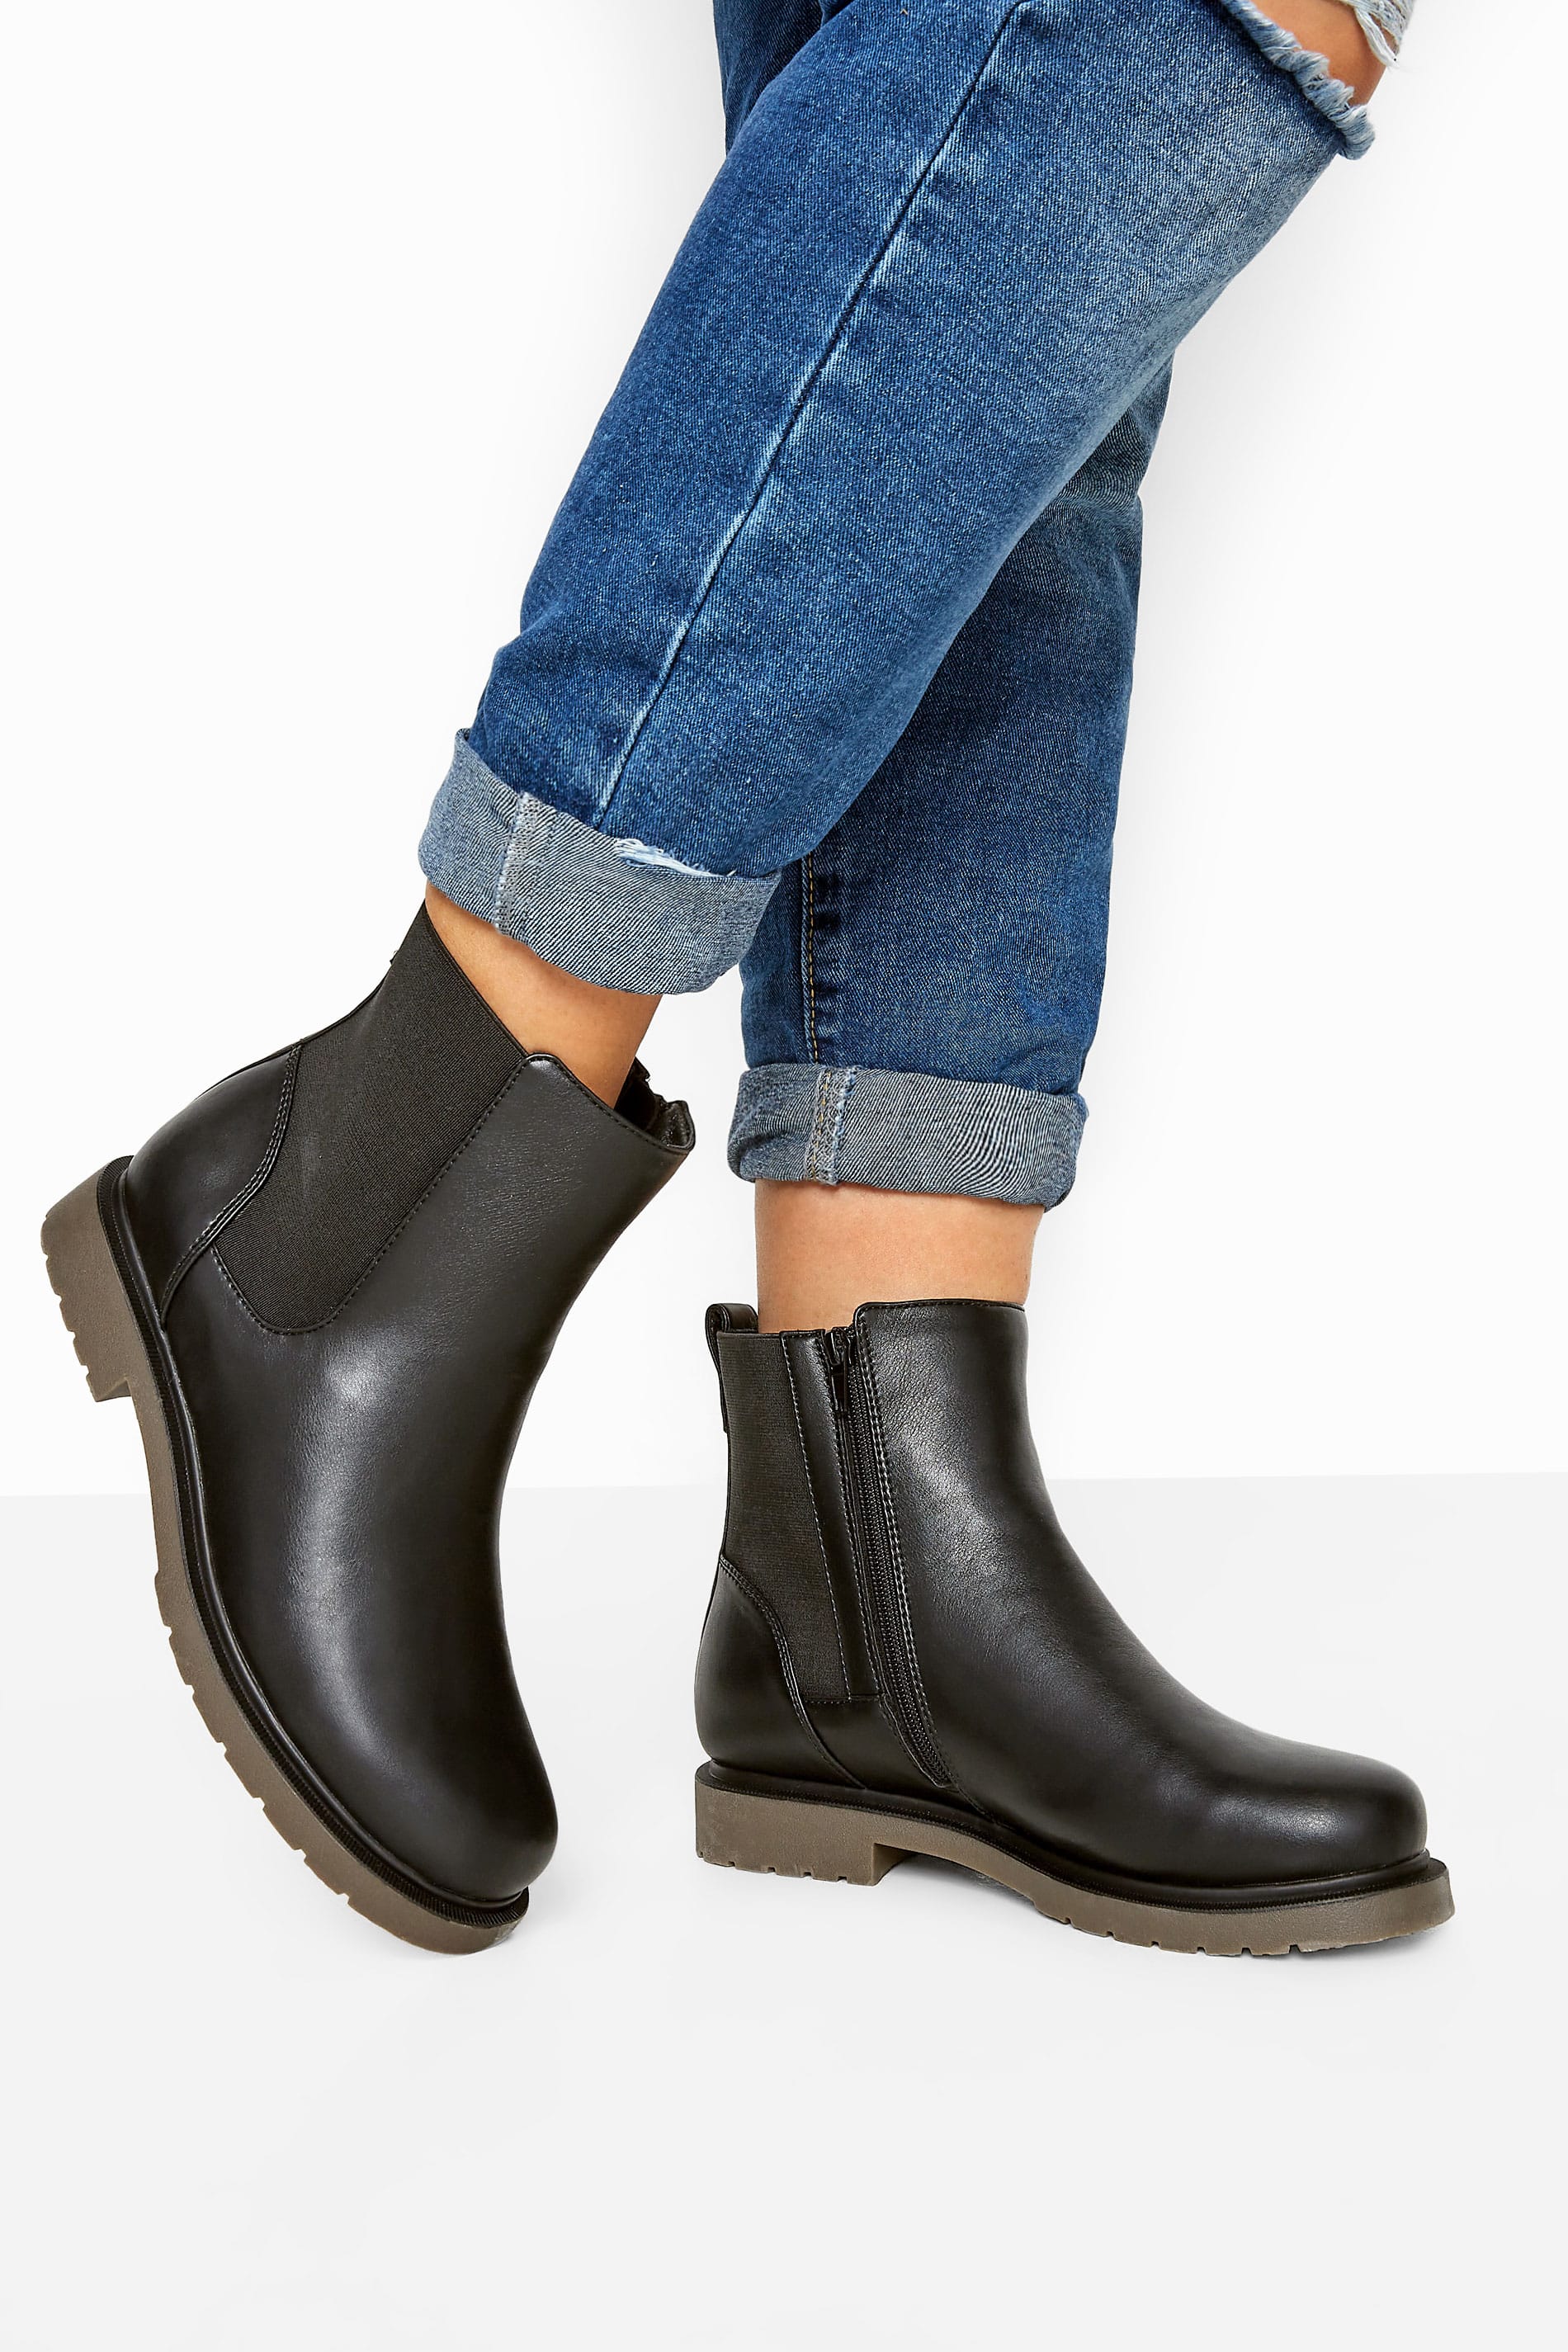 Black Vegan Faux Leather Chunky Chelsea Boots In Extra Wide EEE Fit 1